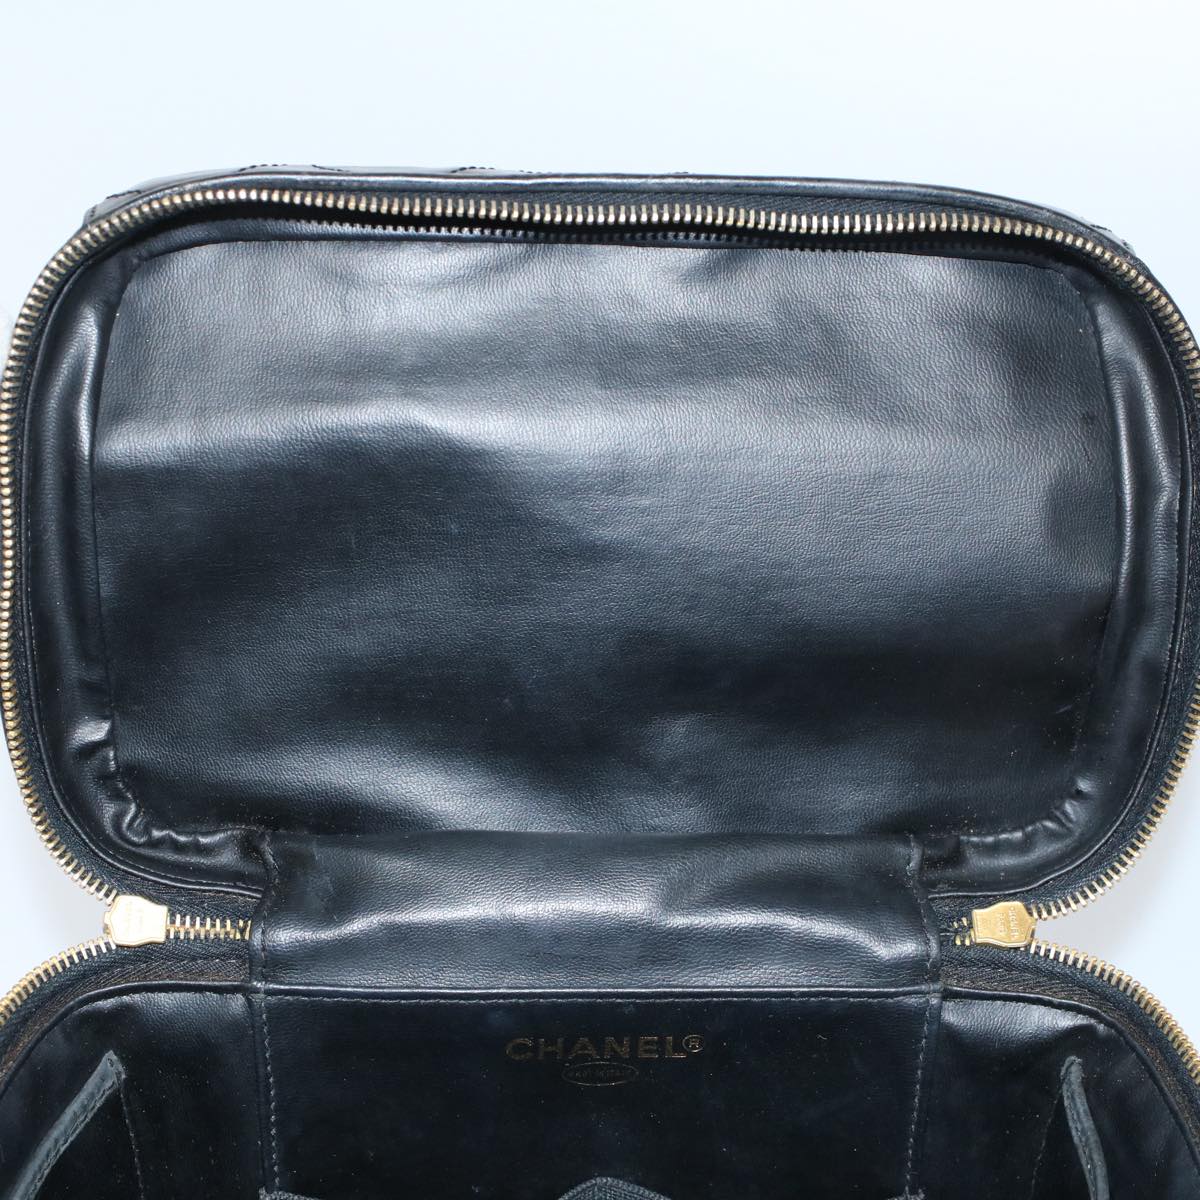 CHANEL Vanity Cosmetic Pouch Patent leather Black CC Auth bs10201